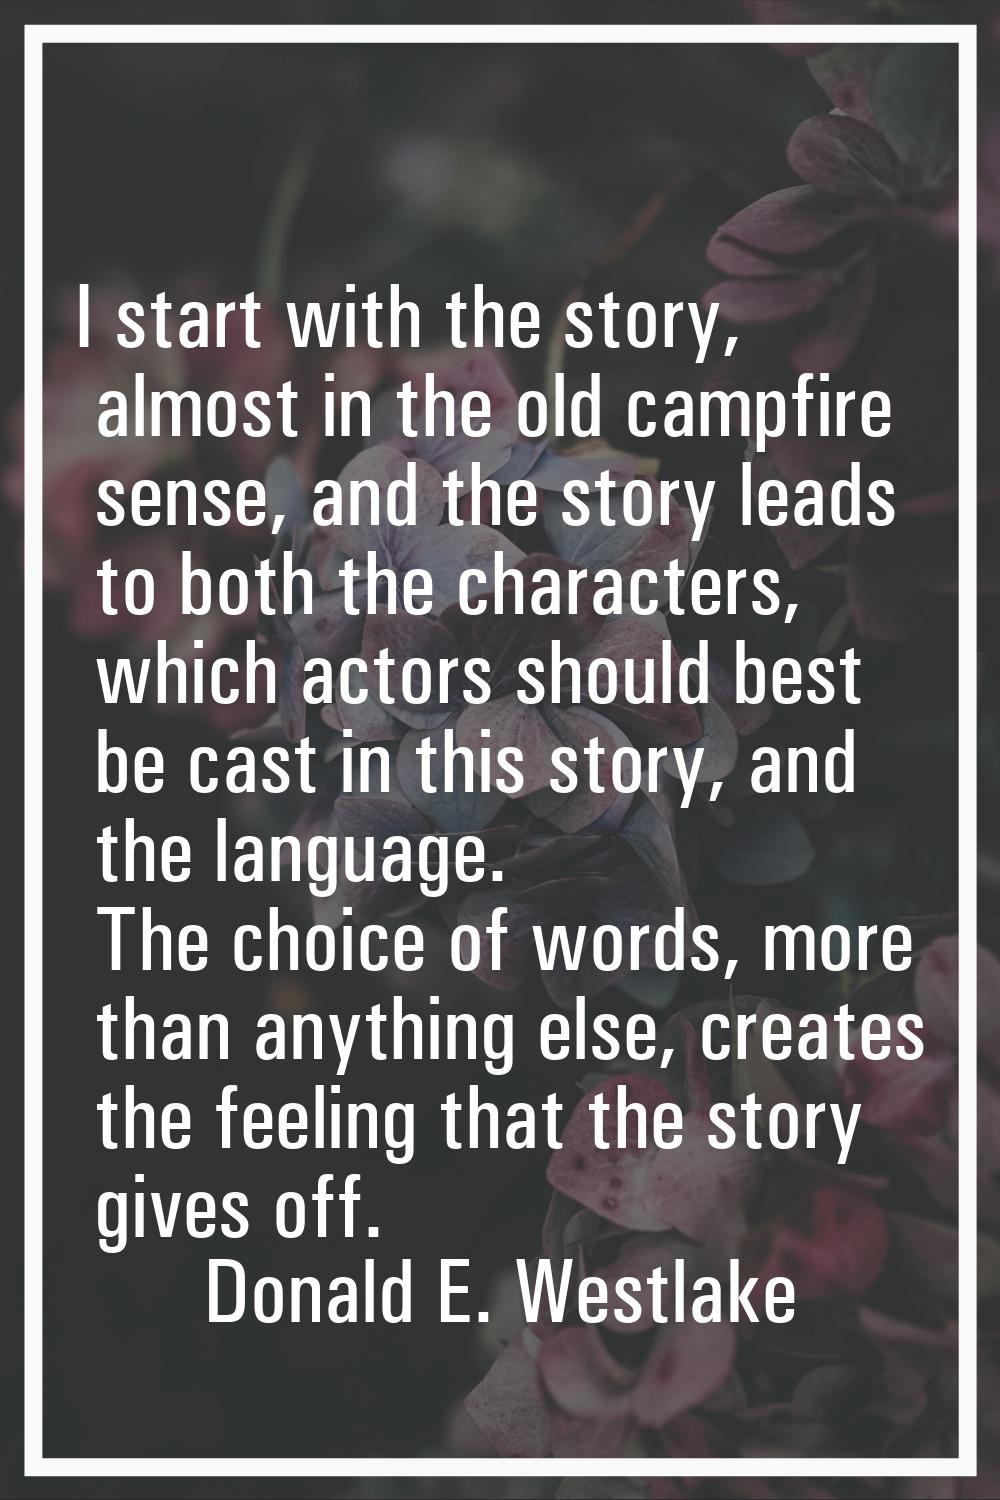 I start with the story, almost in the old campfire sense, and the story leads to both the character